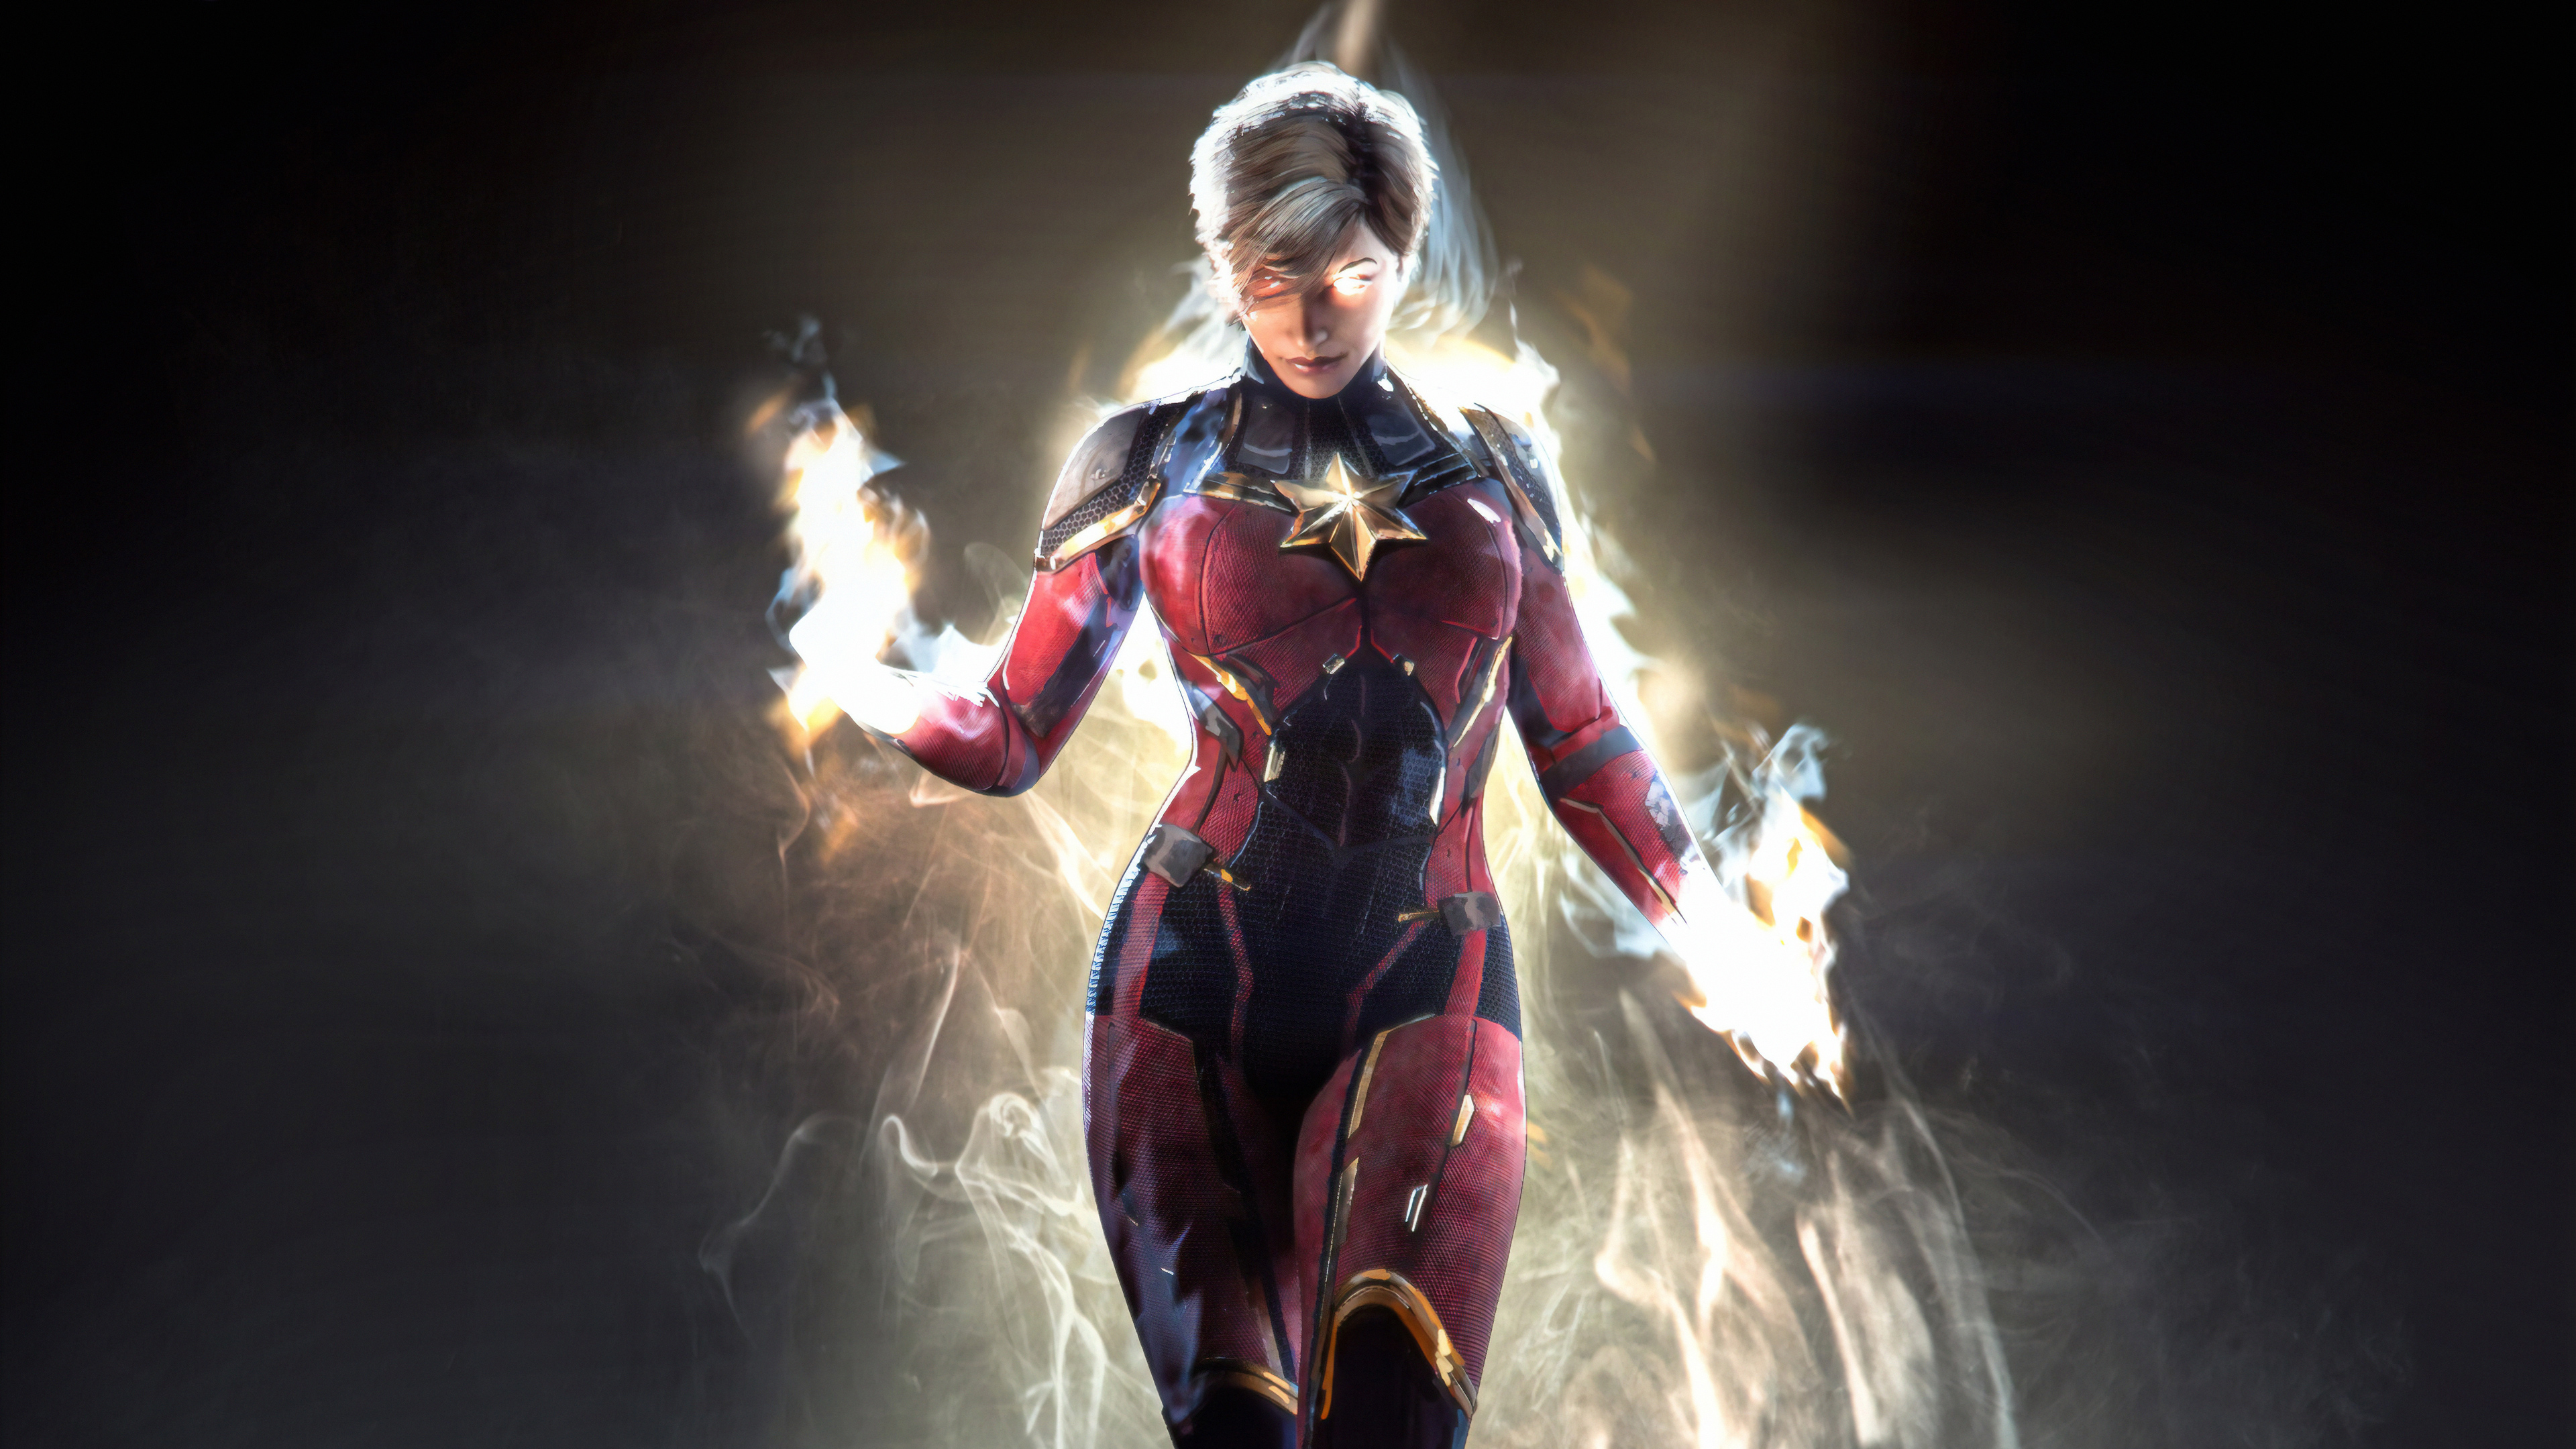 captain marvel new art 1562105993 - Captain Marvel New Art - superheroes wallpapers, hd-wallpapers, captain marvel wallpapers, artwork wallpapers, 4k-wallpapers